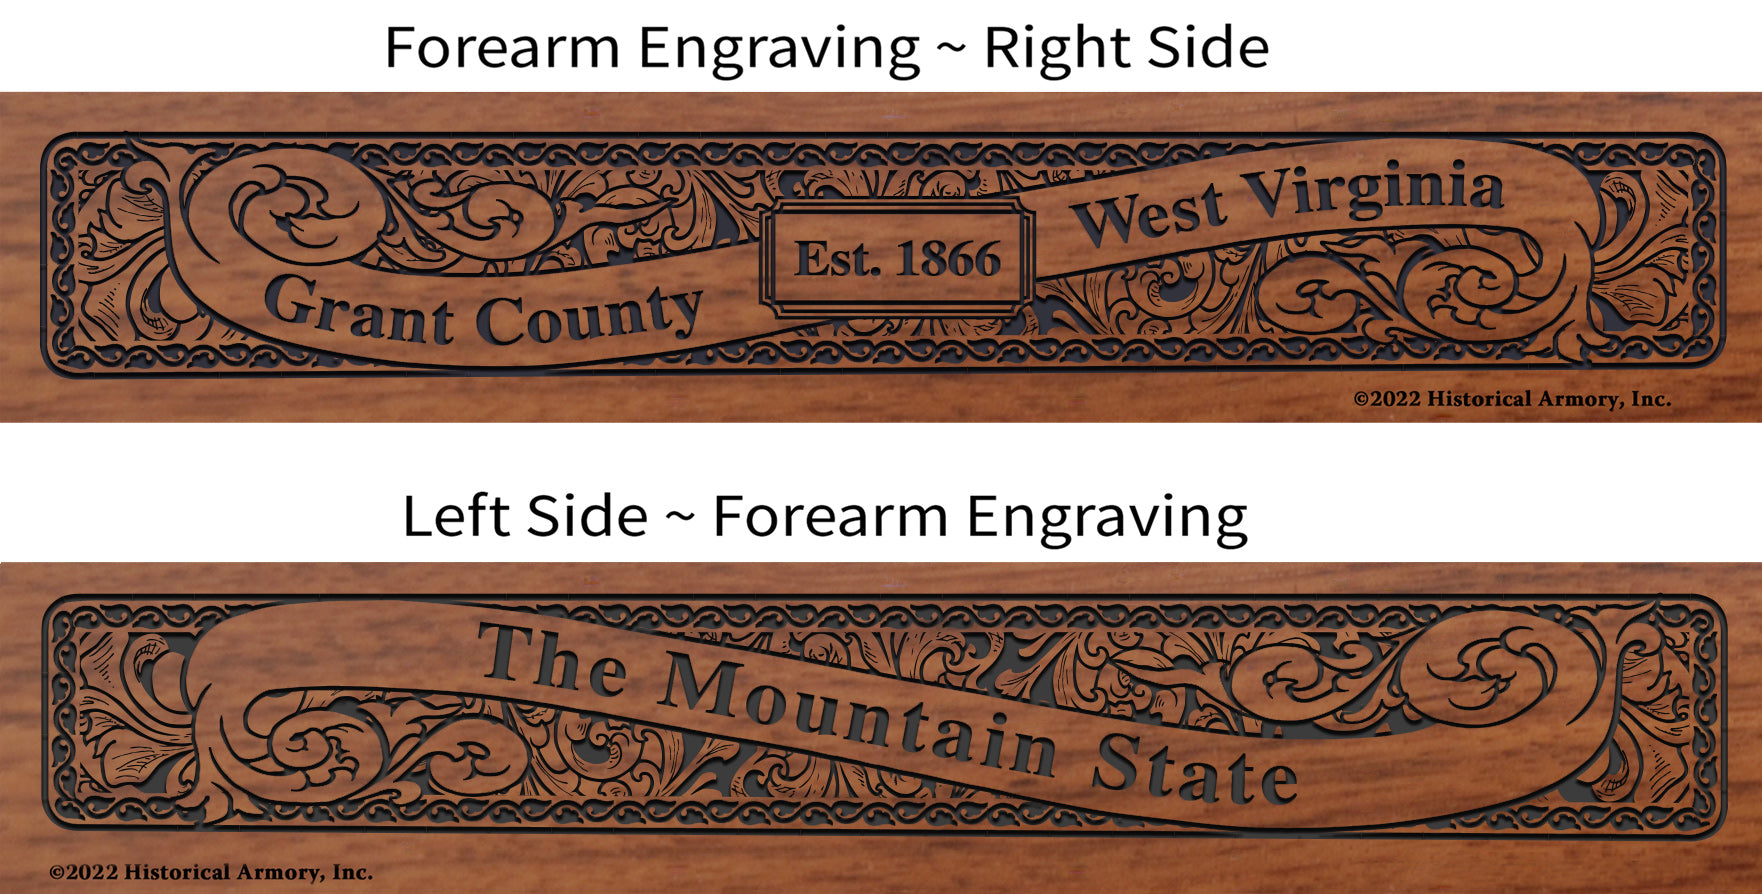 Grant County West Virginia Engraved Rifle Forearm